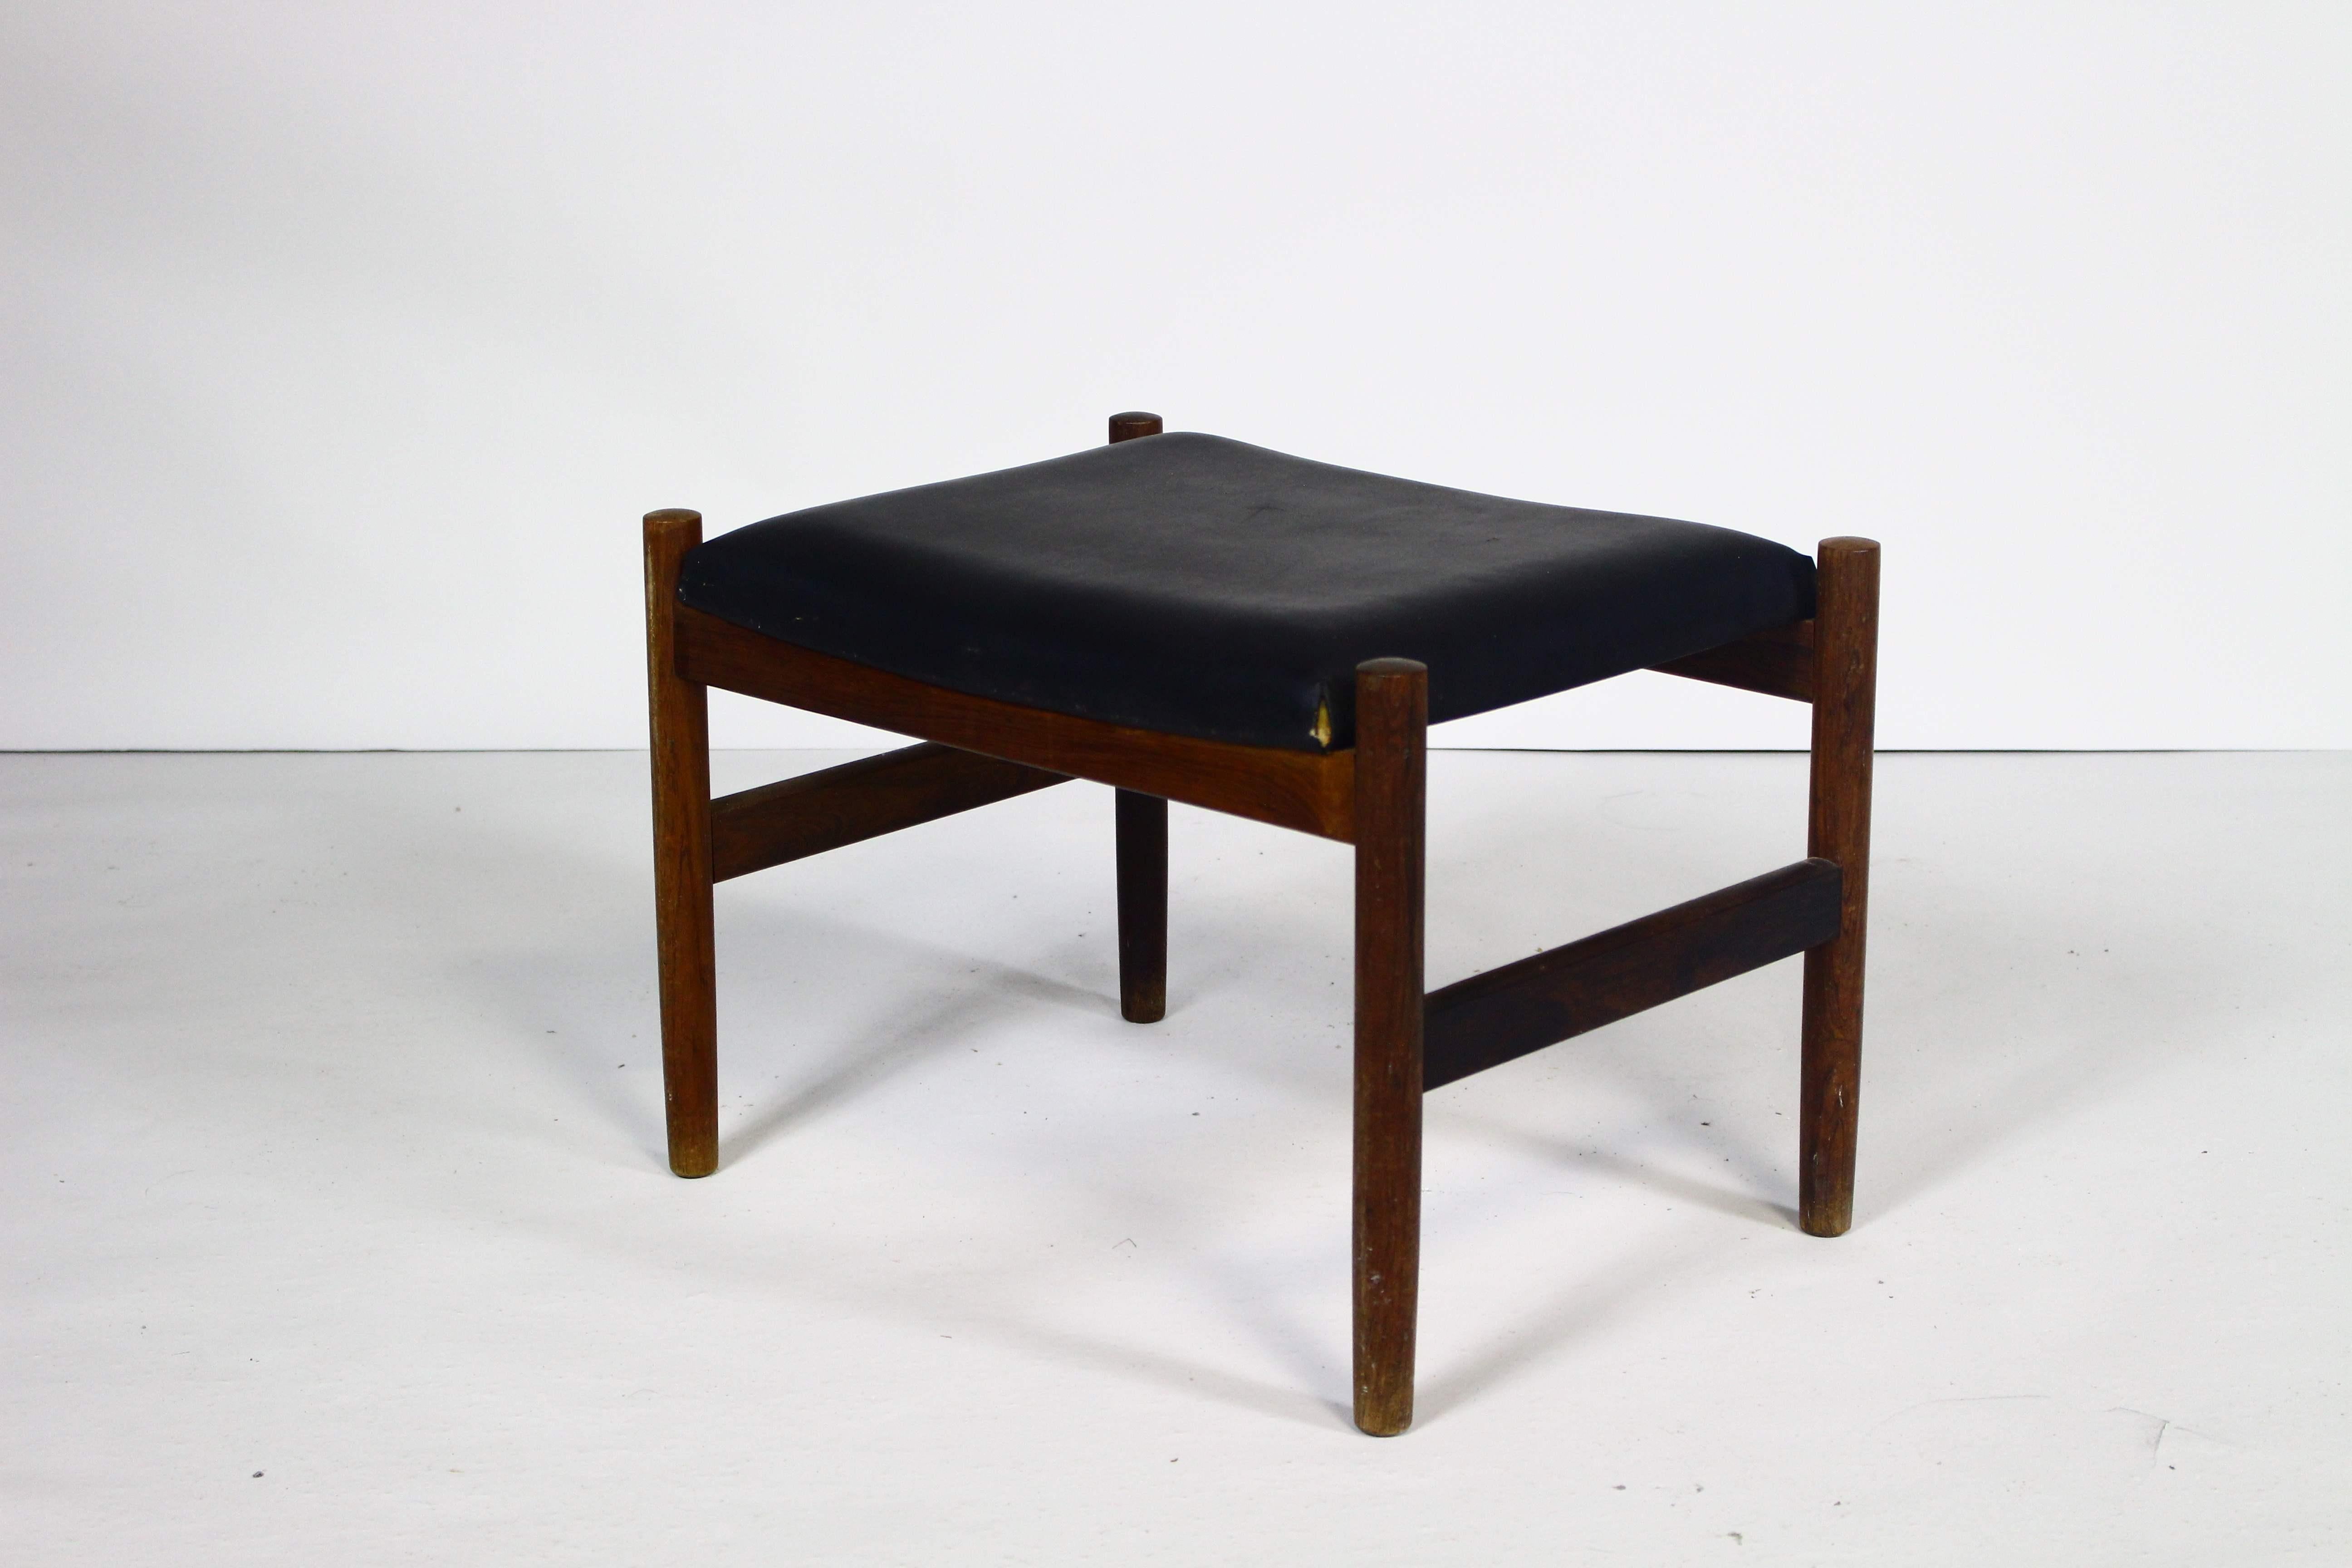 Danish rosewood footstool by Spøttrup
Vintage Rosewood Footstool from 1960s.
Manufactured in Denmark by Spøttrup.
Seat upholstered in black leather.